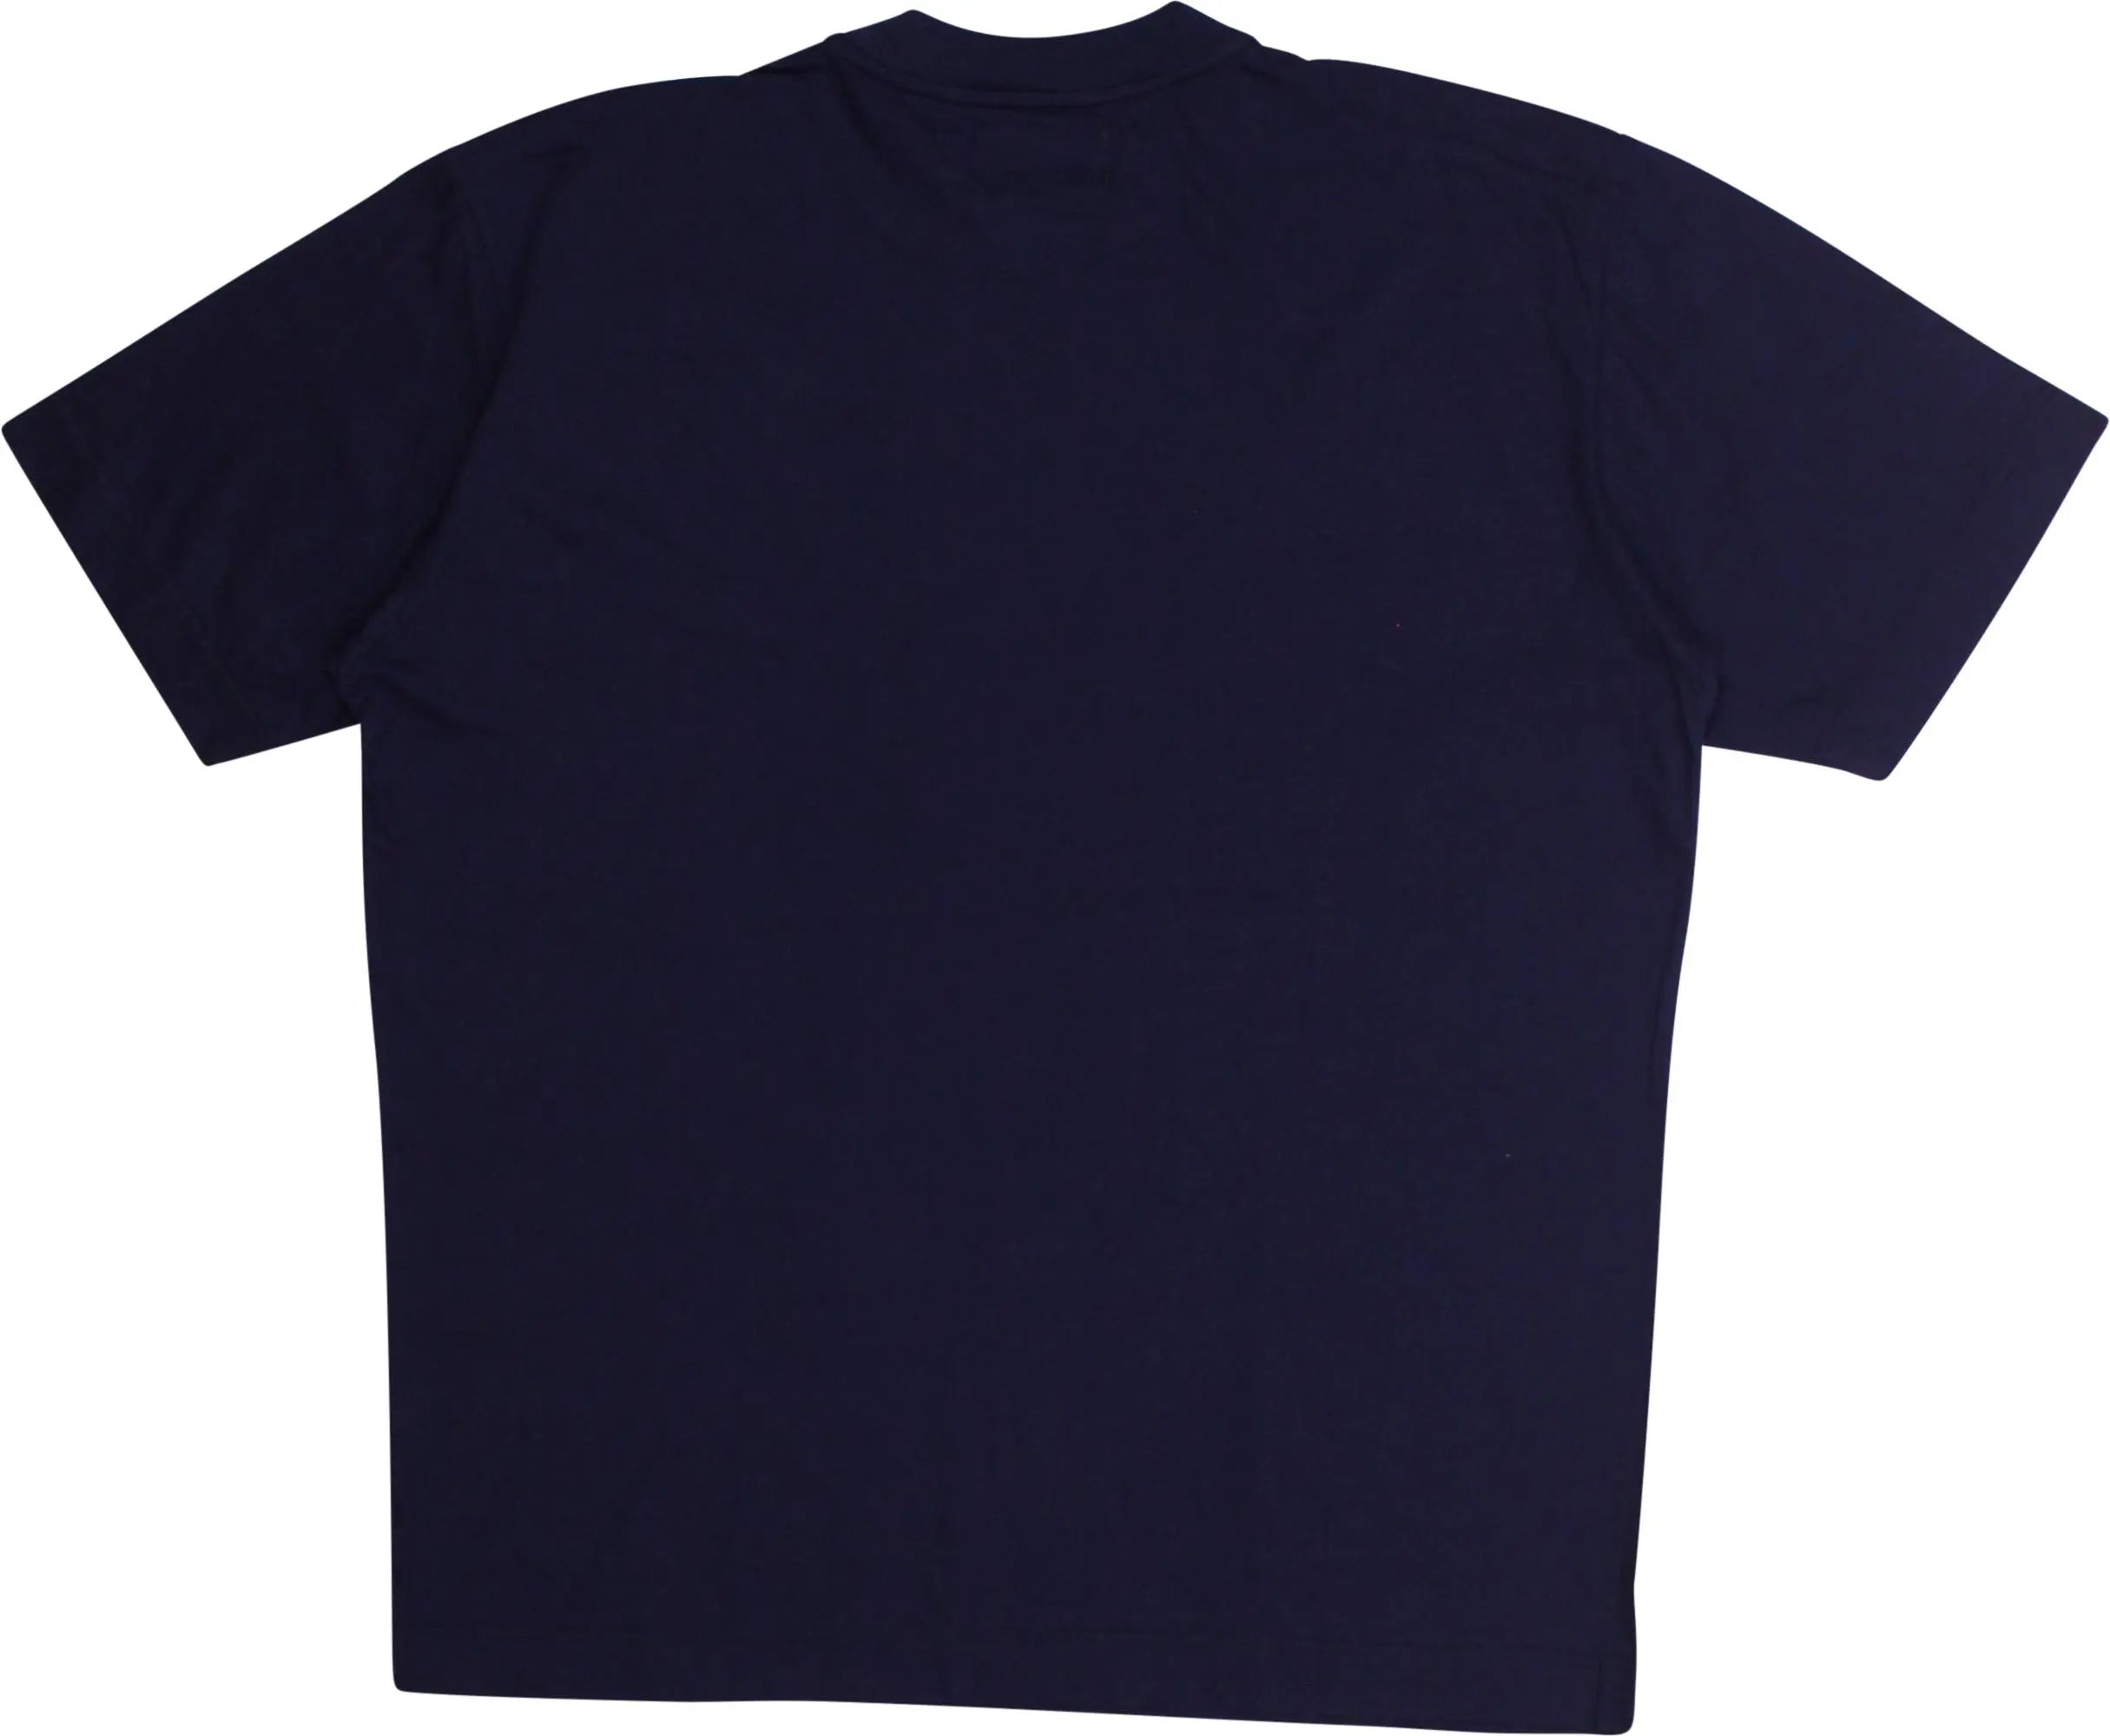 Trussardi - Blue T-shirt by Trussardi Beachwear- ThriftTale.com - Vintage and second handclothing